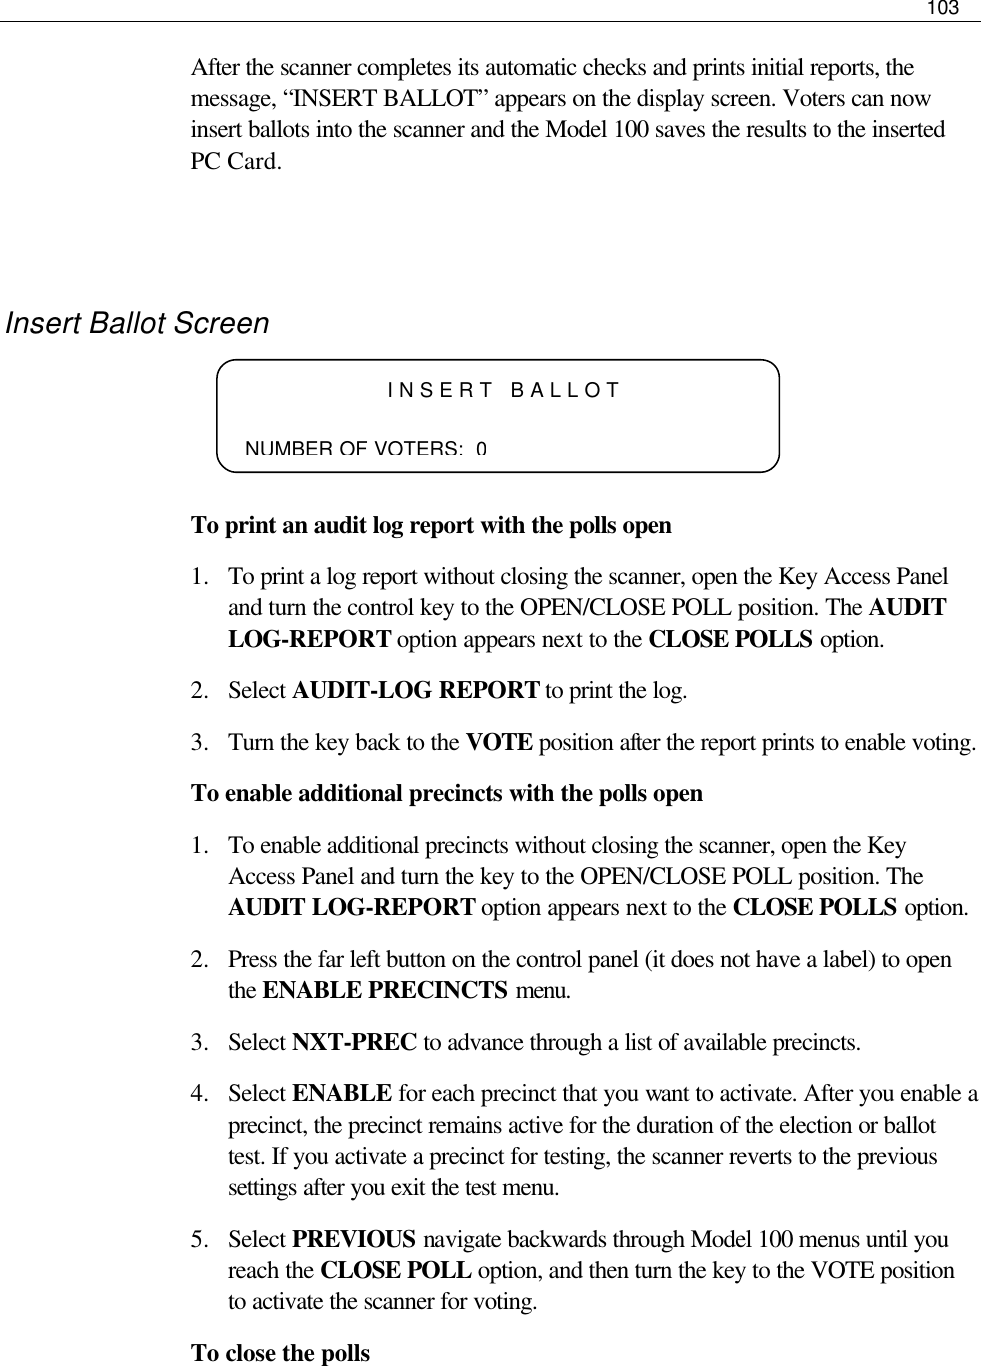     103  After the scanner completes its automatic checks and prints initial reports, the message, “INSERT BALLOT” appears on the display screen. Voters can now insert ballots into the scanner and the Model 100 saves the results to the inserted PC Card.   Insert Ballot Screen    To print an audit log report with the polls open 1.  To print a log report without closing the scanner, open the Key Access Panel and turn the control key to the OPEN/CLOSE POLL position. The AUDIT LOG-REPORT option appears next to the CLOSE POLLS option. 2.  Select AUDIT-LOG REPORT to print the log.  3.  Turn the key back to the VOTE position after the report prints to enable voting. To enable additional precincts with the polls open 1.  To enable additional precincts without closing the scanner, open the Key Access Panel and turn the key to the OPEN/CLOSE POLL position. The AUDIT LOG-REPORT option appears next to the CLOSE POLLS option. 2.  Press the far left button on the control panel (it does not have a label) to open the ENABLE PRECINCTS menu. 3.  Select NXT-PREC to advance through a list of available precincts. 4.  Select ENABLE for each precinct that you want to activate. After you enable a precinct, the precinct remains active for the duration of the election or ballot test. If you activate a precinct for testing, the scanner reverts to the previous settings after you exit the test menu. 5.  Select PREVIOUS navigate backwards through Model 100 menus until you reach the CLOSE POLL option, and then turn the key to the VOTE position to activate the scanner for voting. To close the polls INSERT BALLOT       NUMBER OF VOTERS:  0 